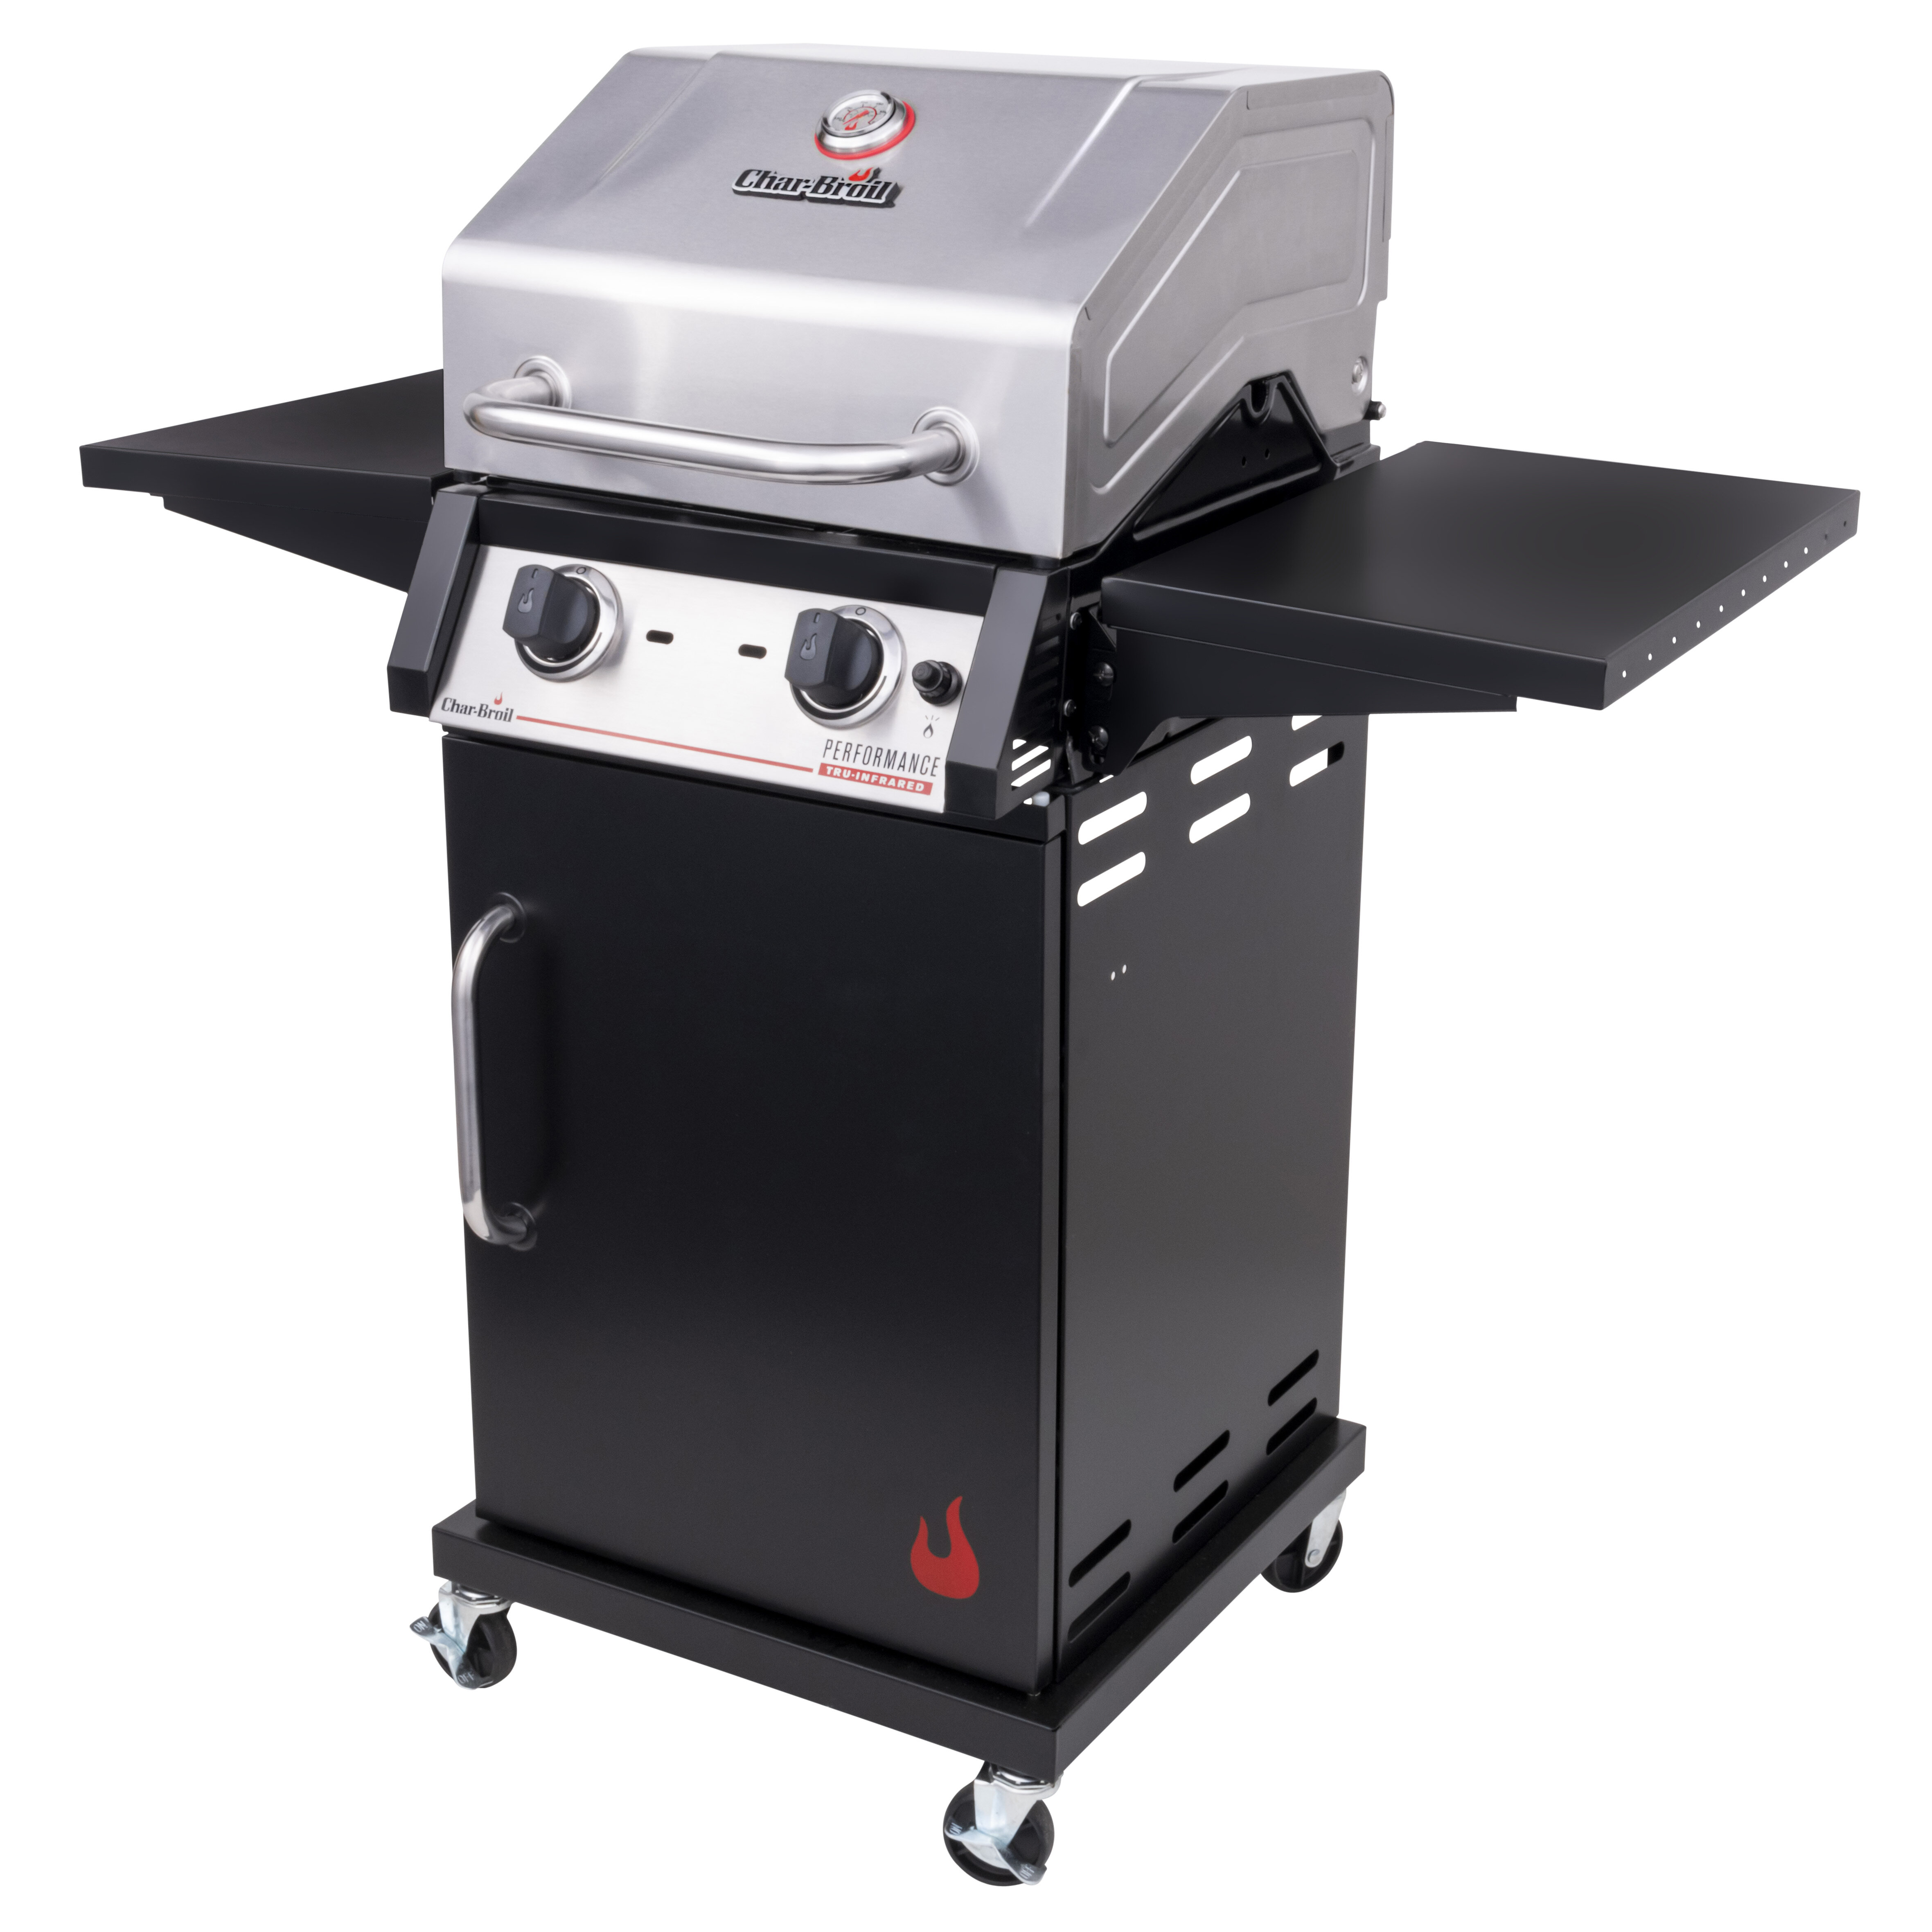 CharBroil Performance Series 2-Burner Gas Grill, Black & Stainless & Reviews Wayfair